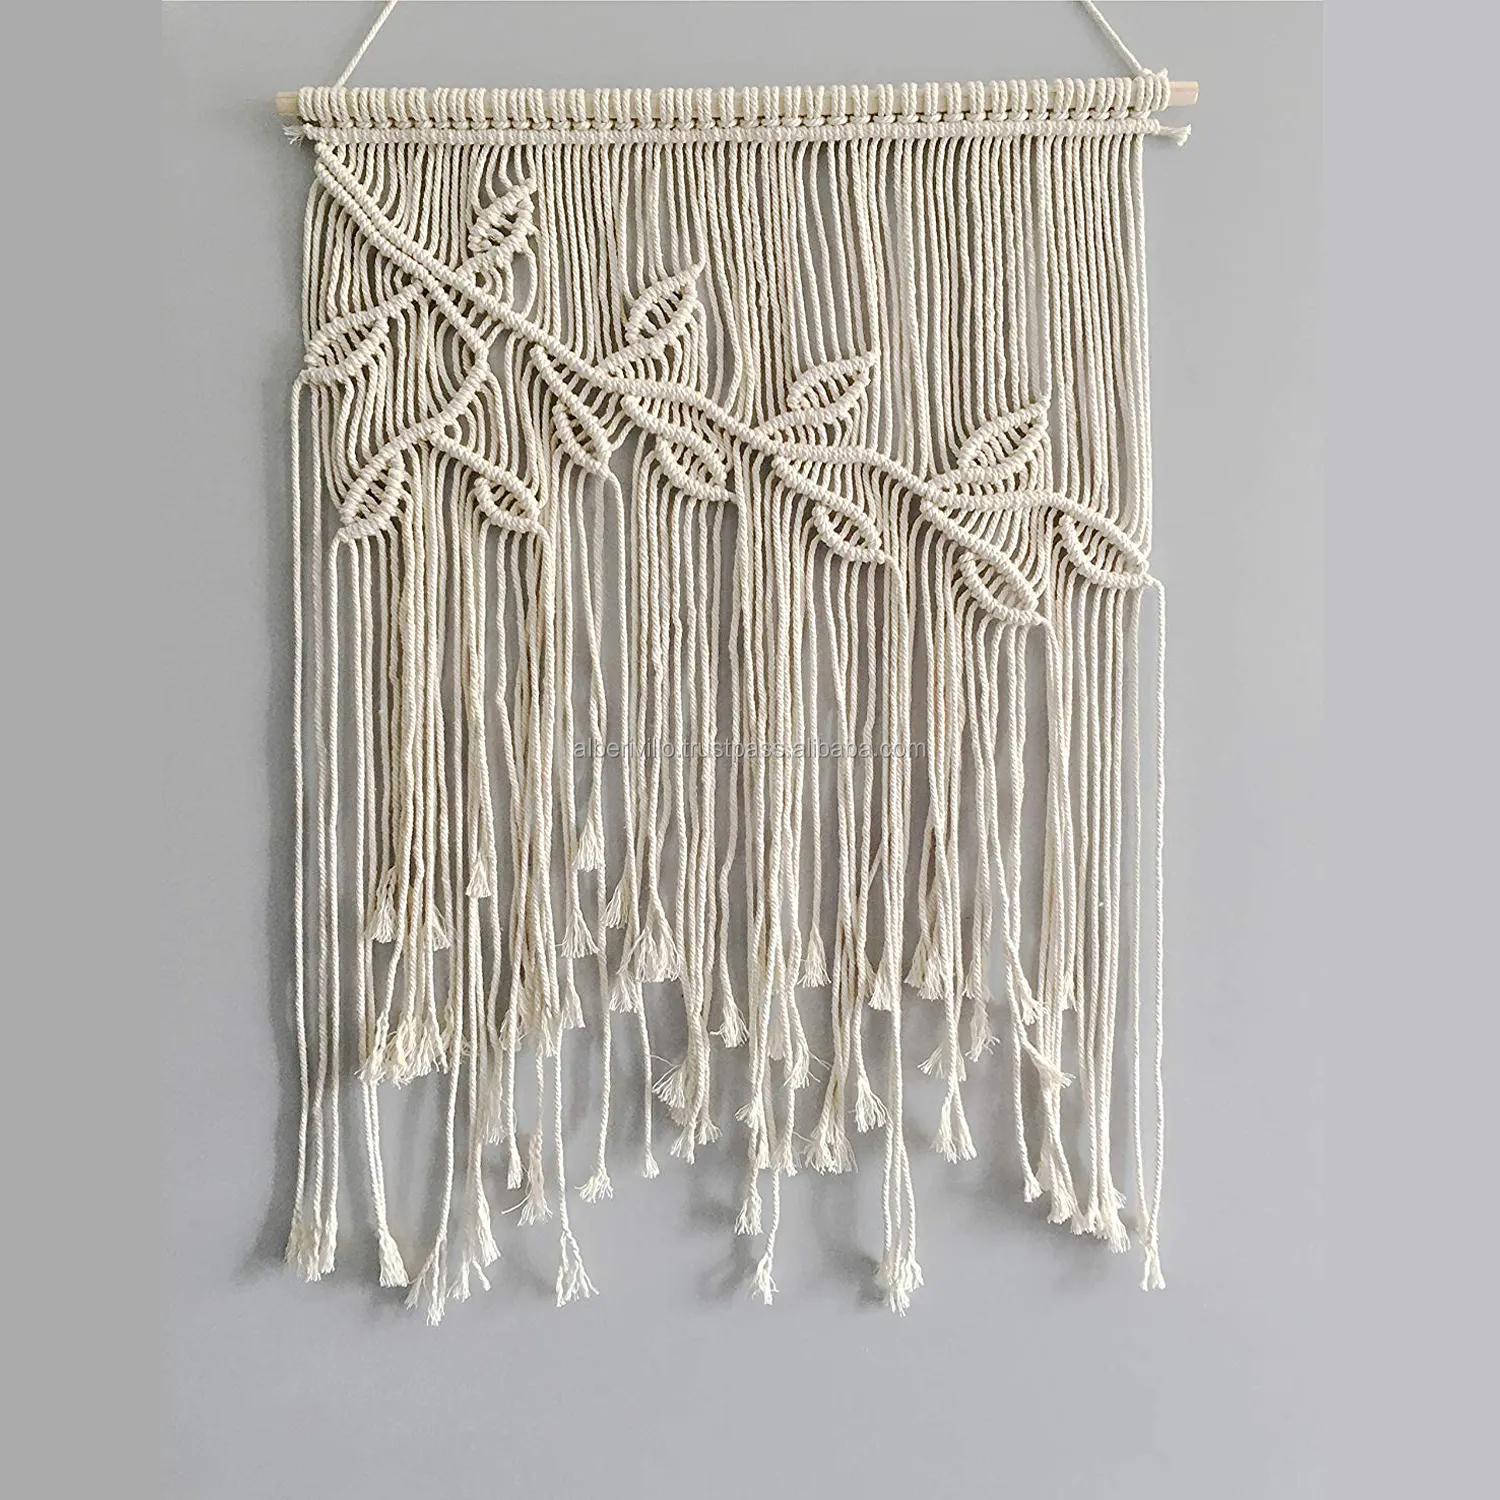 Boho Chic Bohemian Macrame Hand Woven twisted Cotton Cords For Wall Hanging Wall Art India Wholesaler